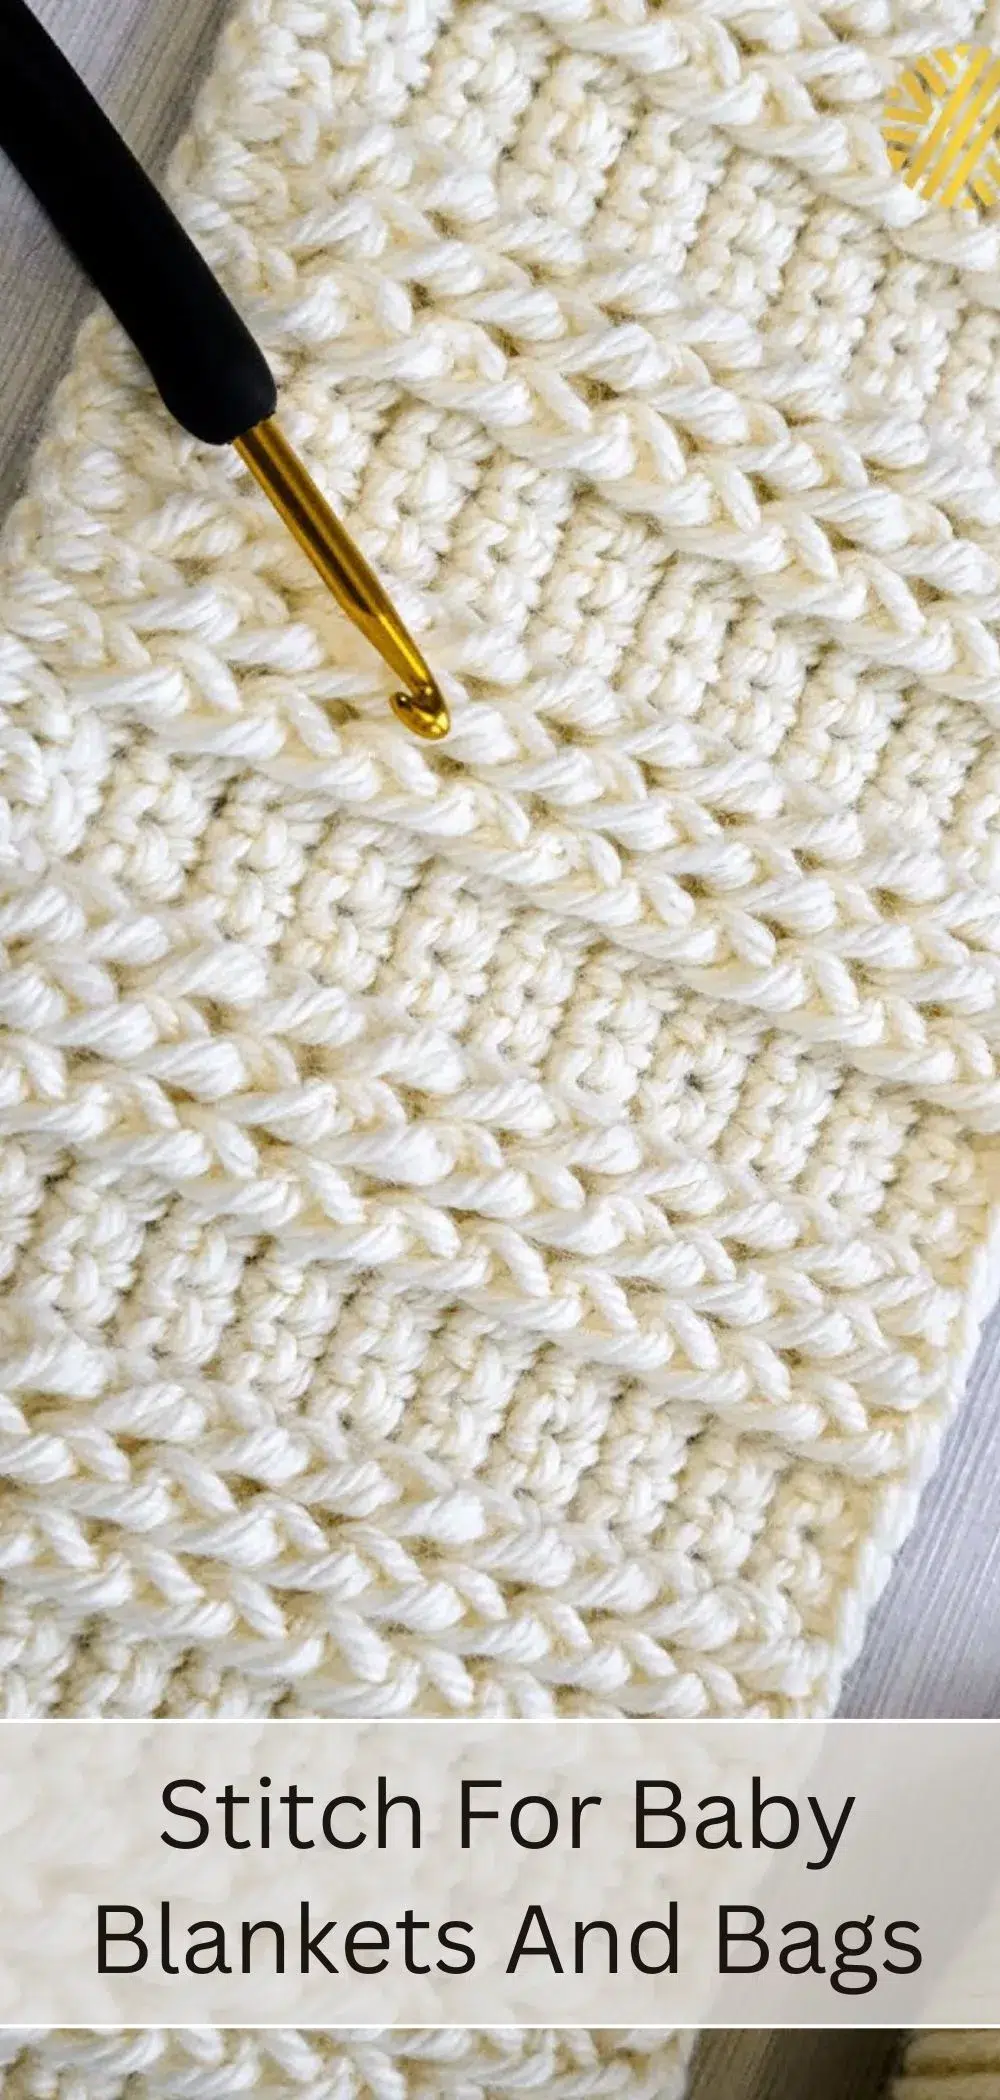 If you are new in crocheting you must understand that this stitch is one of the basic knowledge for crocheting Blankets And Bags.